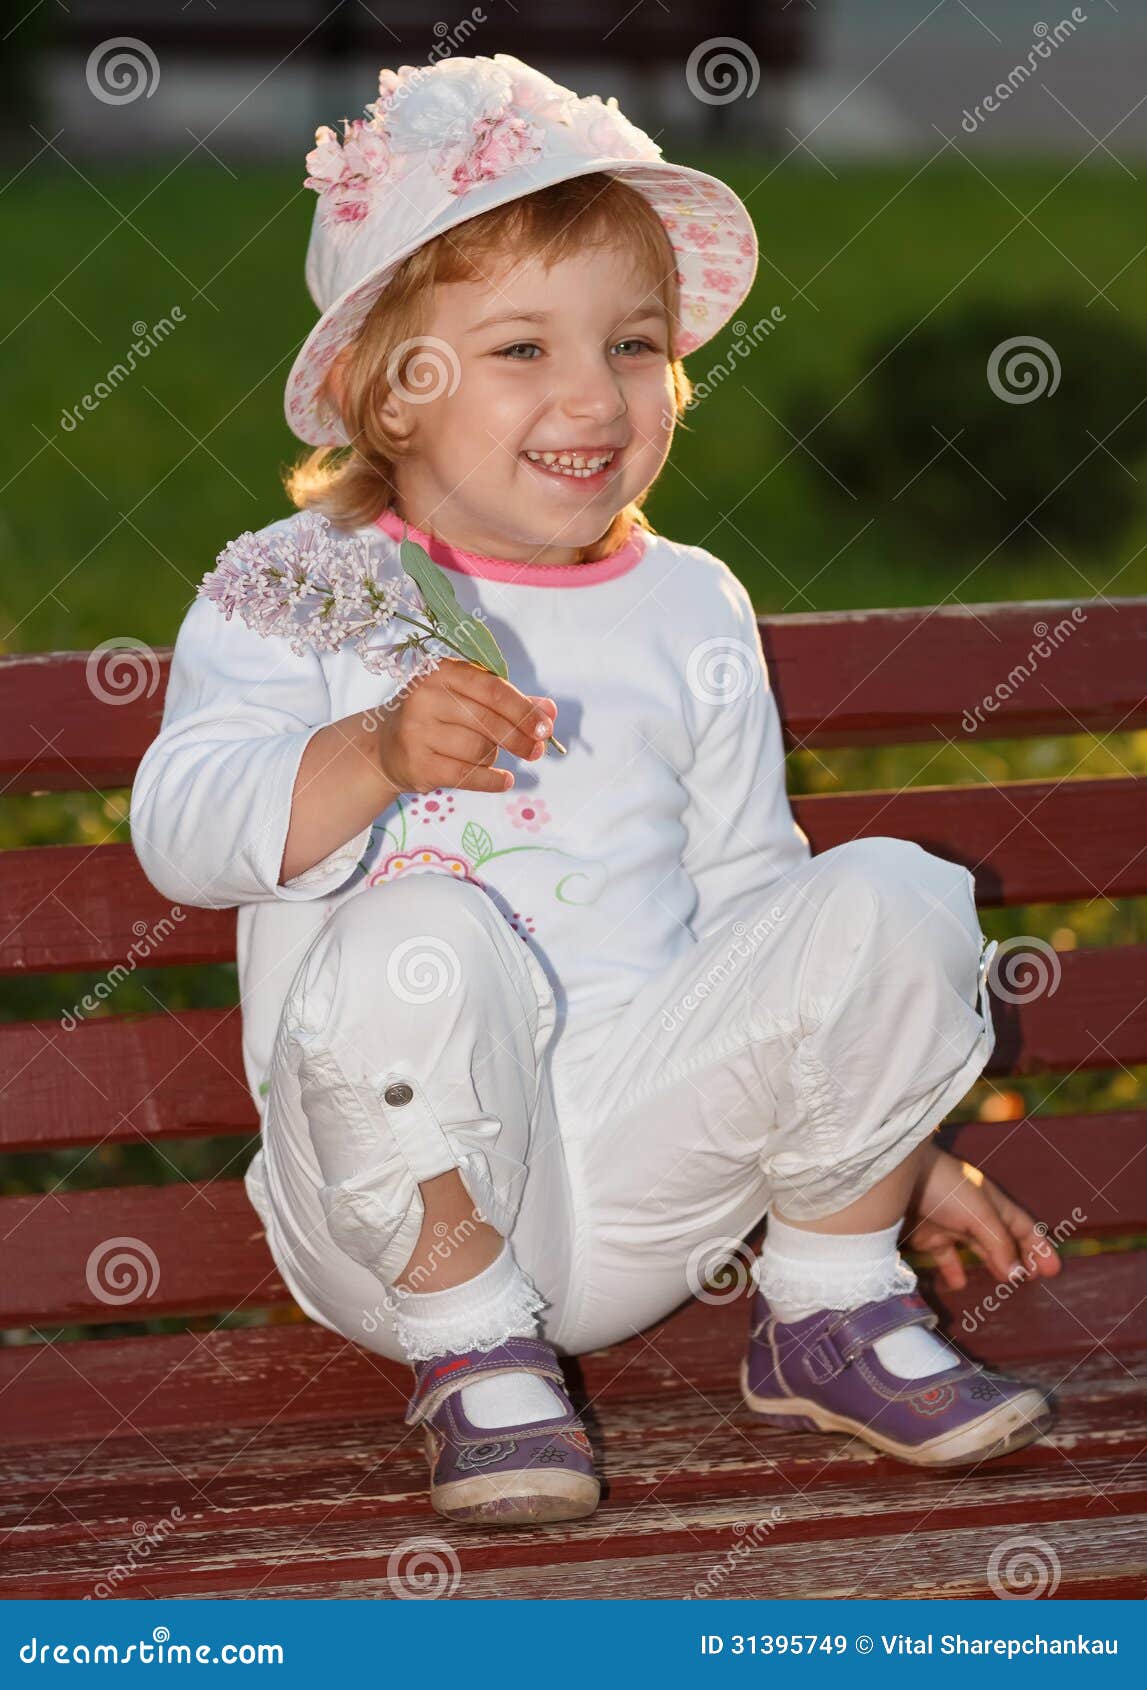 The Girl in Park on a Bench. Stock Image - Image of physiognomy, small ...